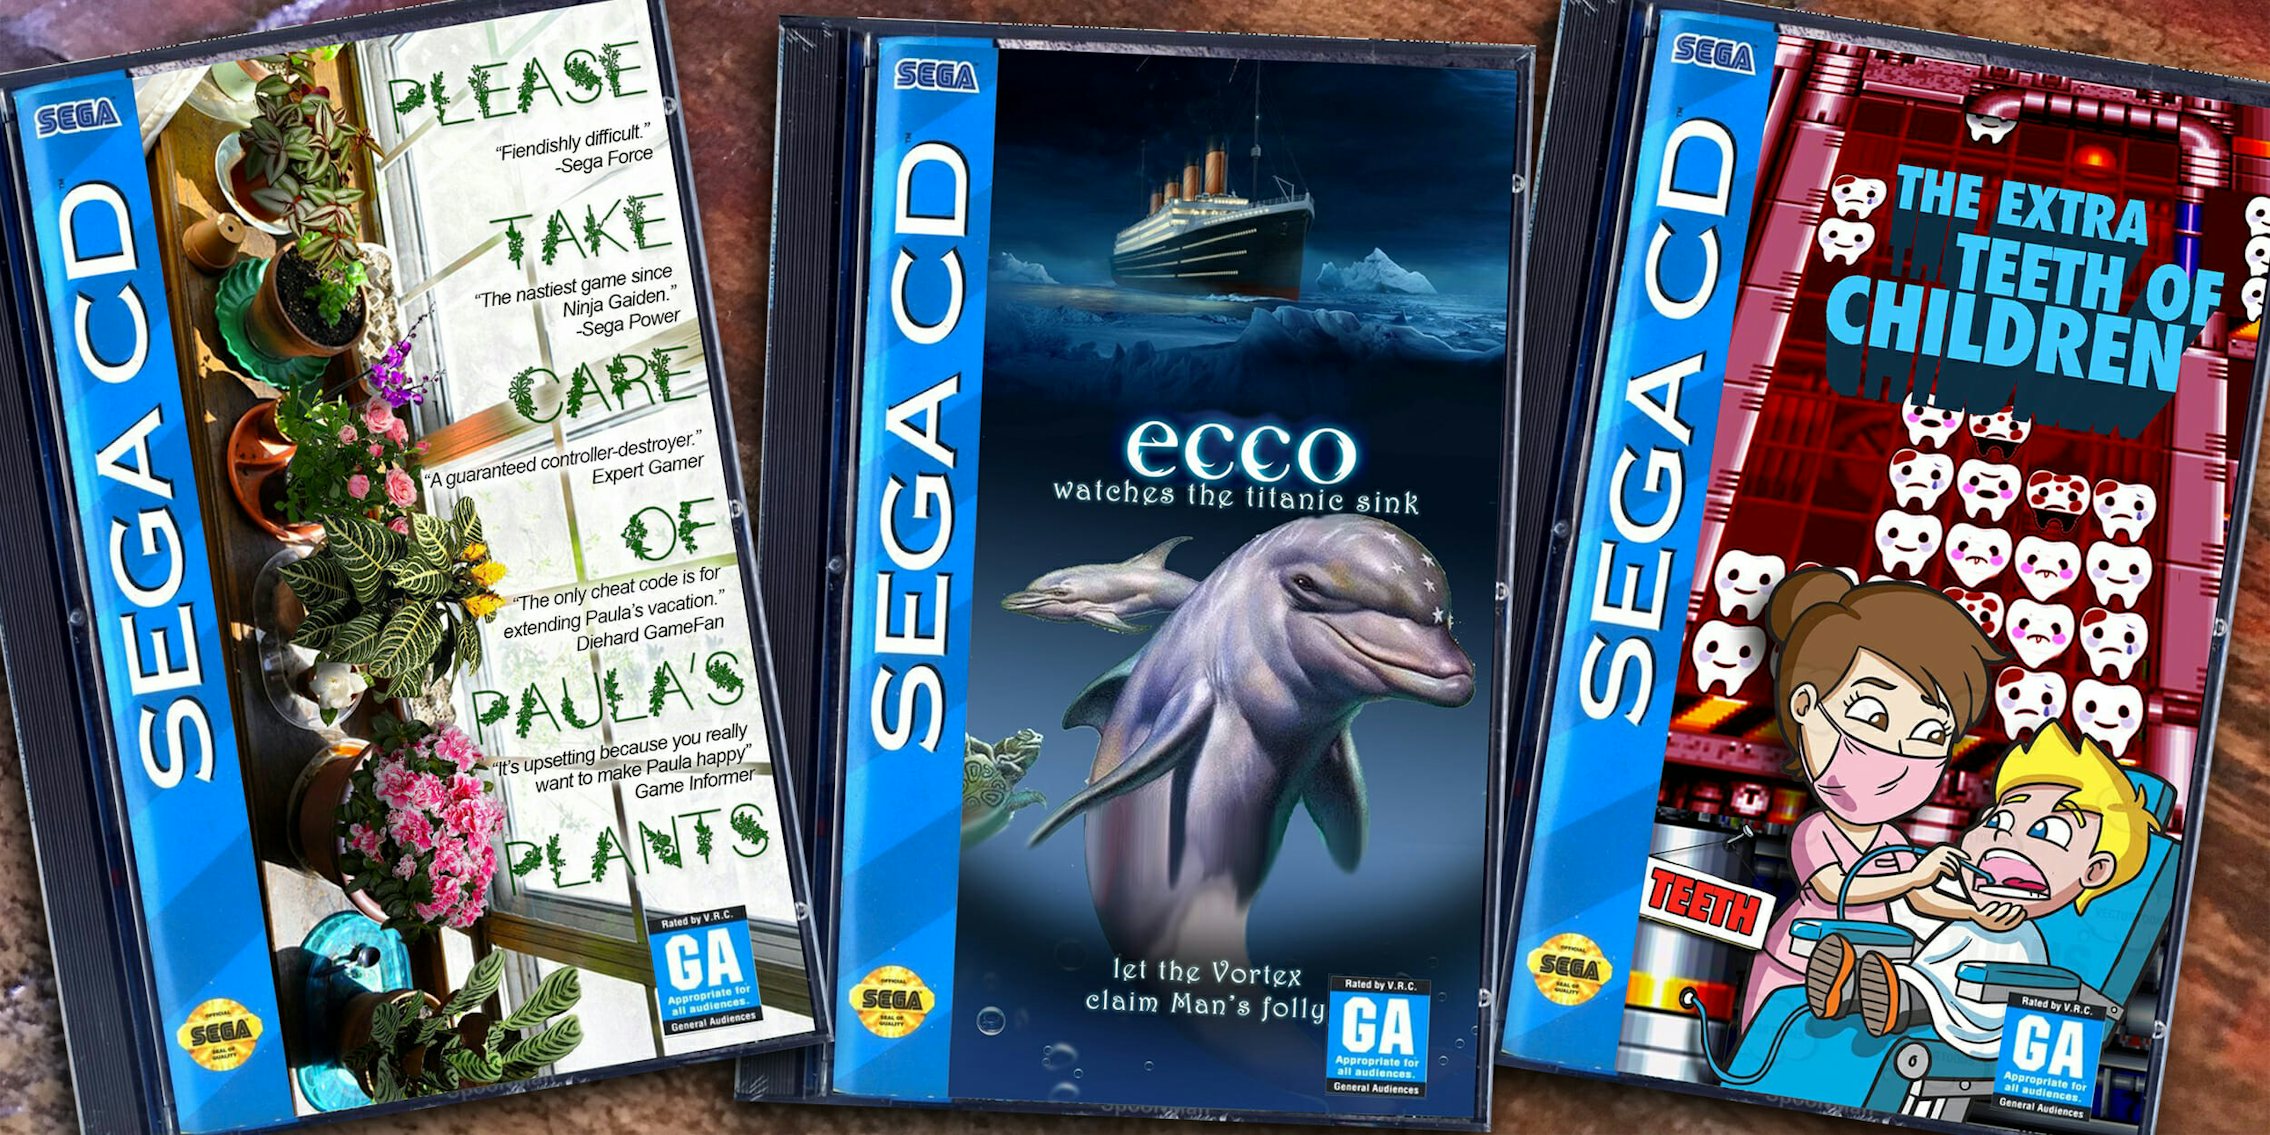 fake Sega CD games 'Please Take Care of Paula's Plants', 'ecco Watches the Titanic Sink', and 'The Extra Teeth of Children'